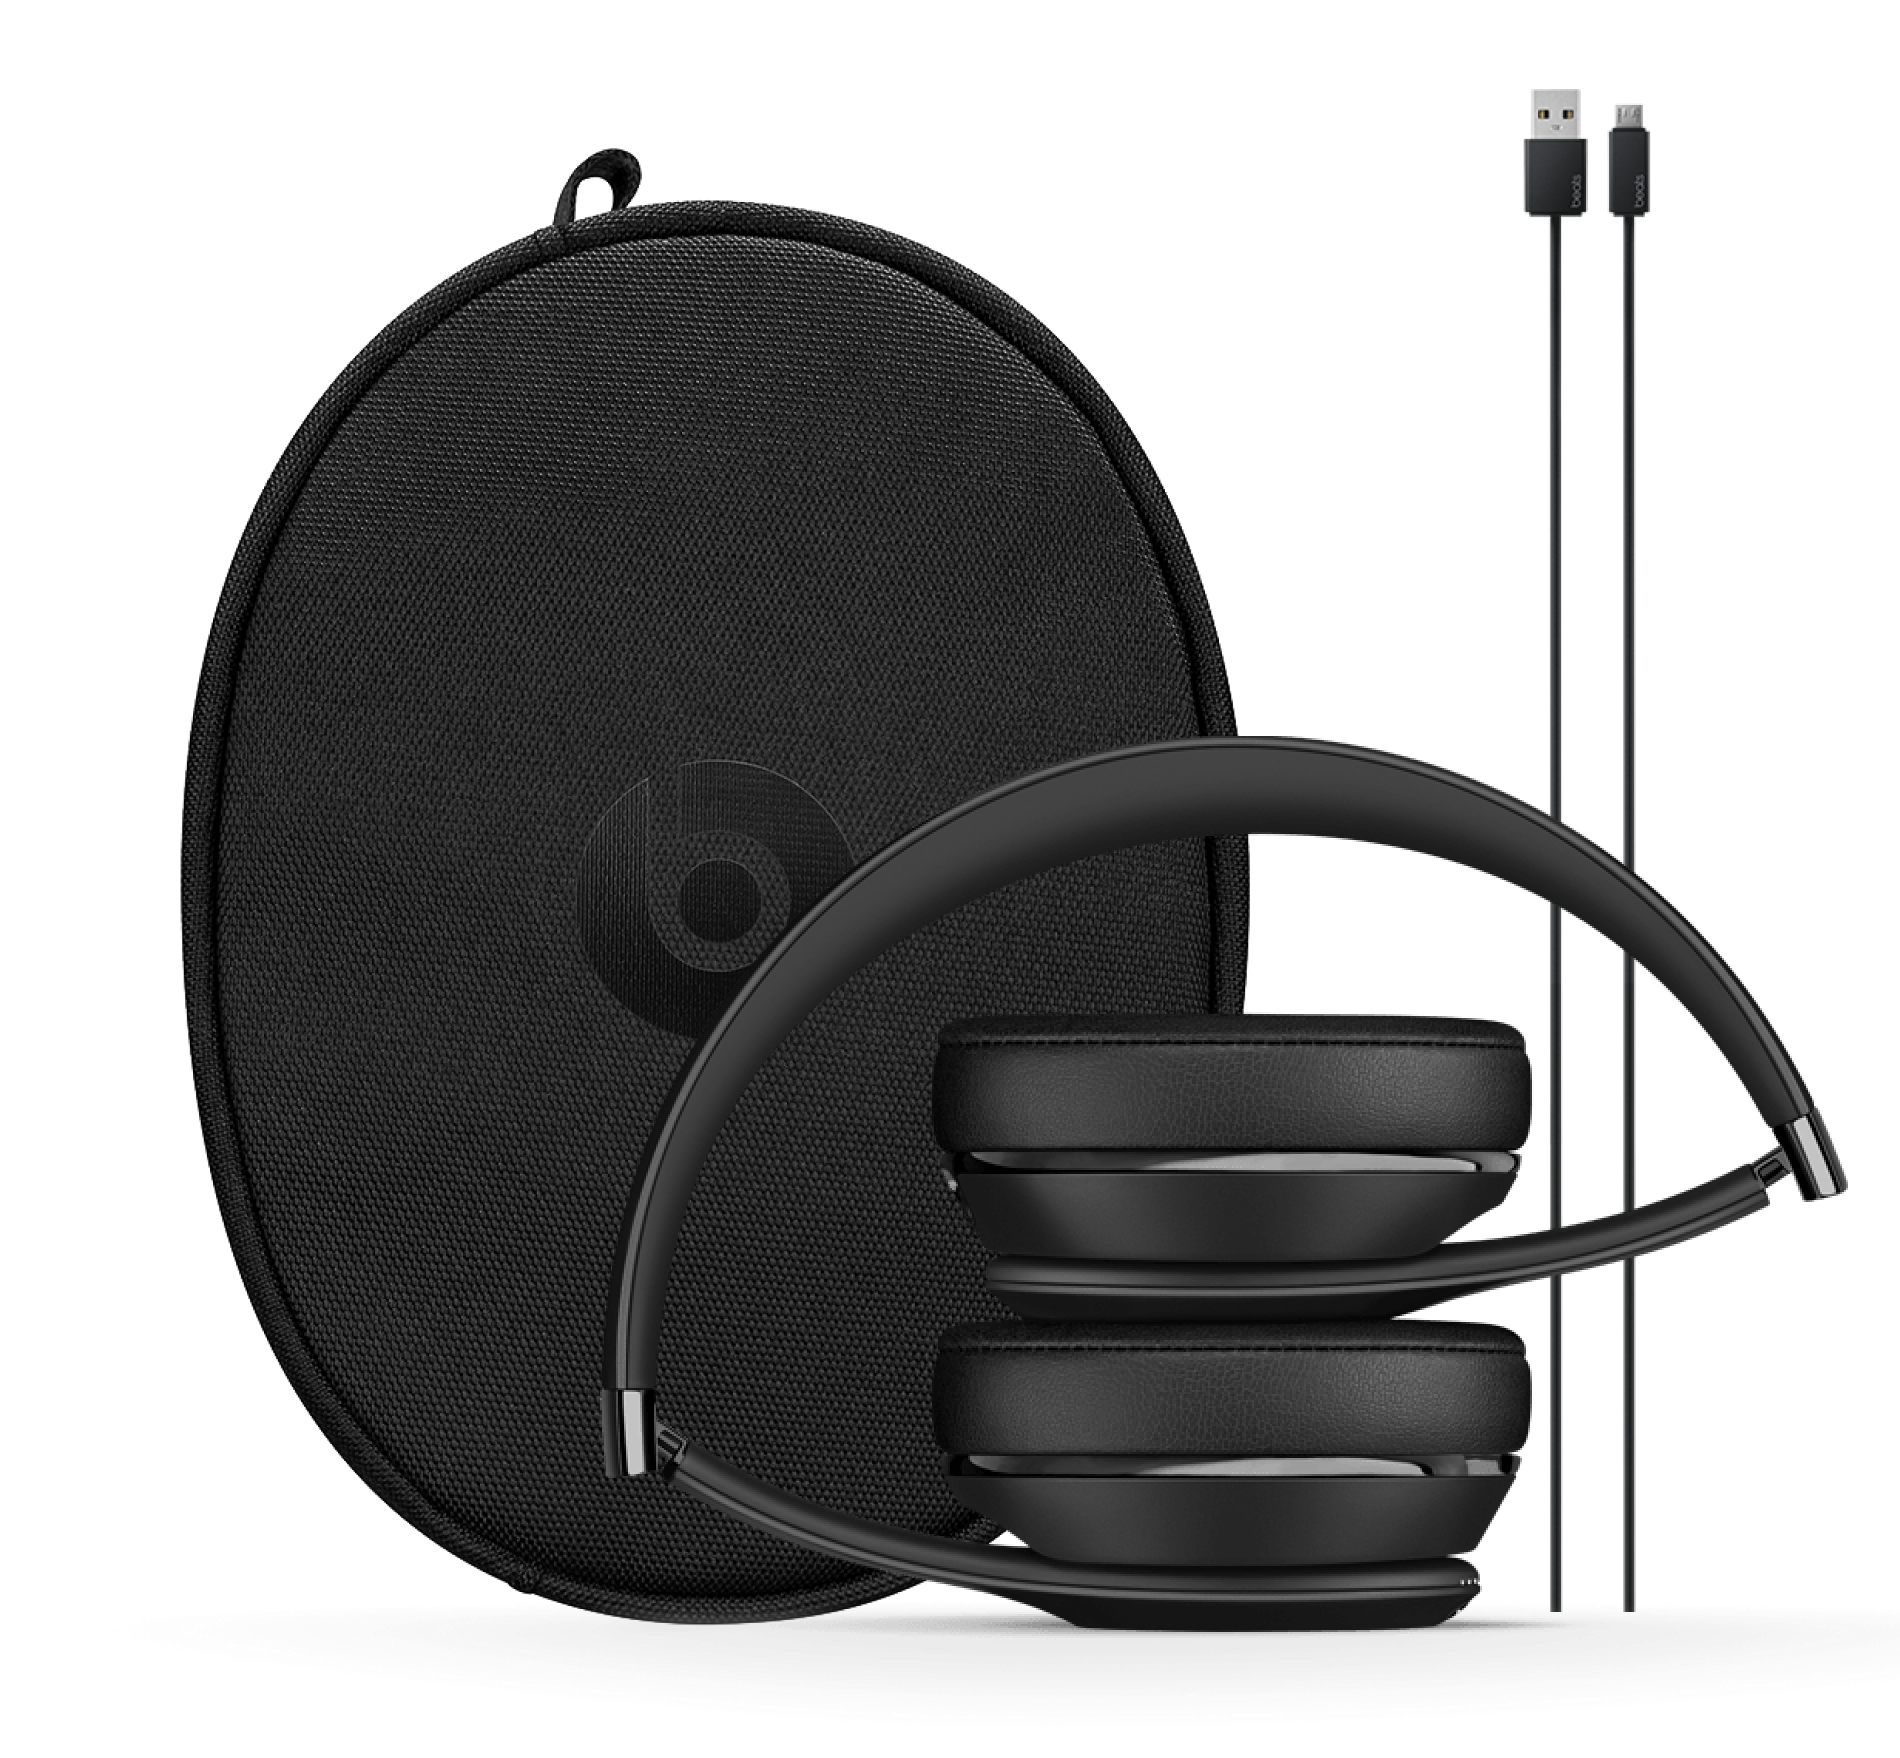 Beats Solo3 Wireless what's in the box contents shown: headphones, case, and charging cable